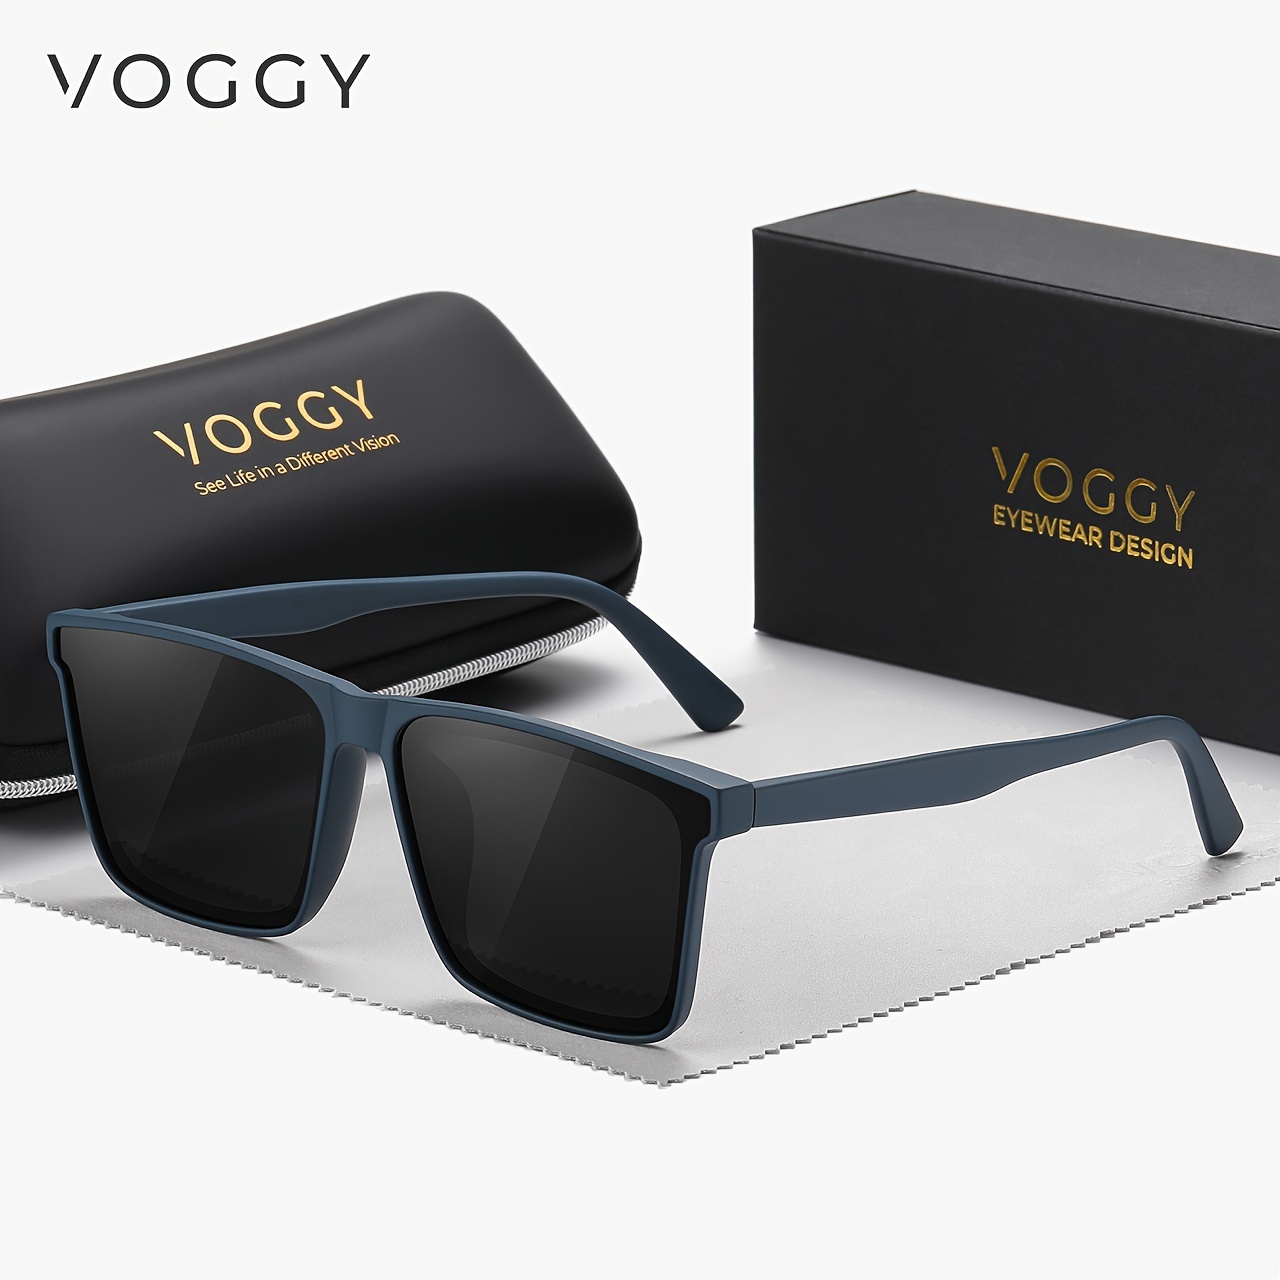 

Voggy Tr90 Polarized Sunglasses For Men Women, For Driving, Outdoor Activities, Cycling, Fishing, Vacation, And Travel With Gifts Box Mother's Day/give Gifts